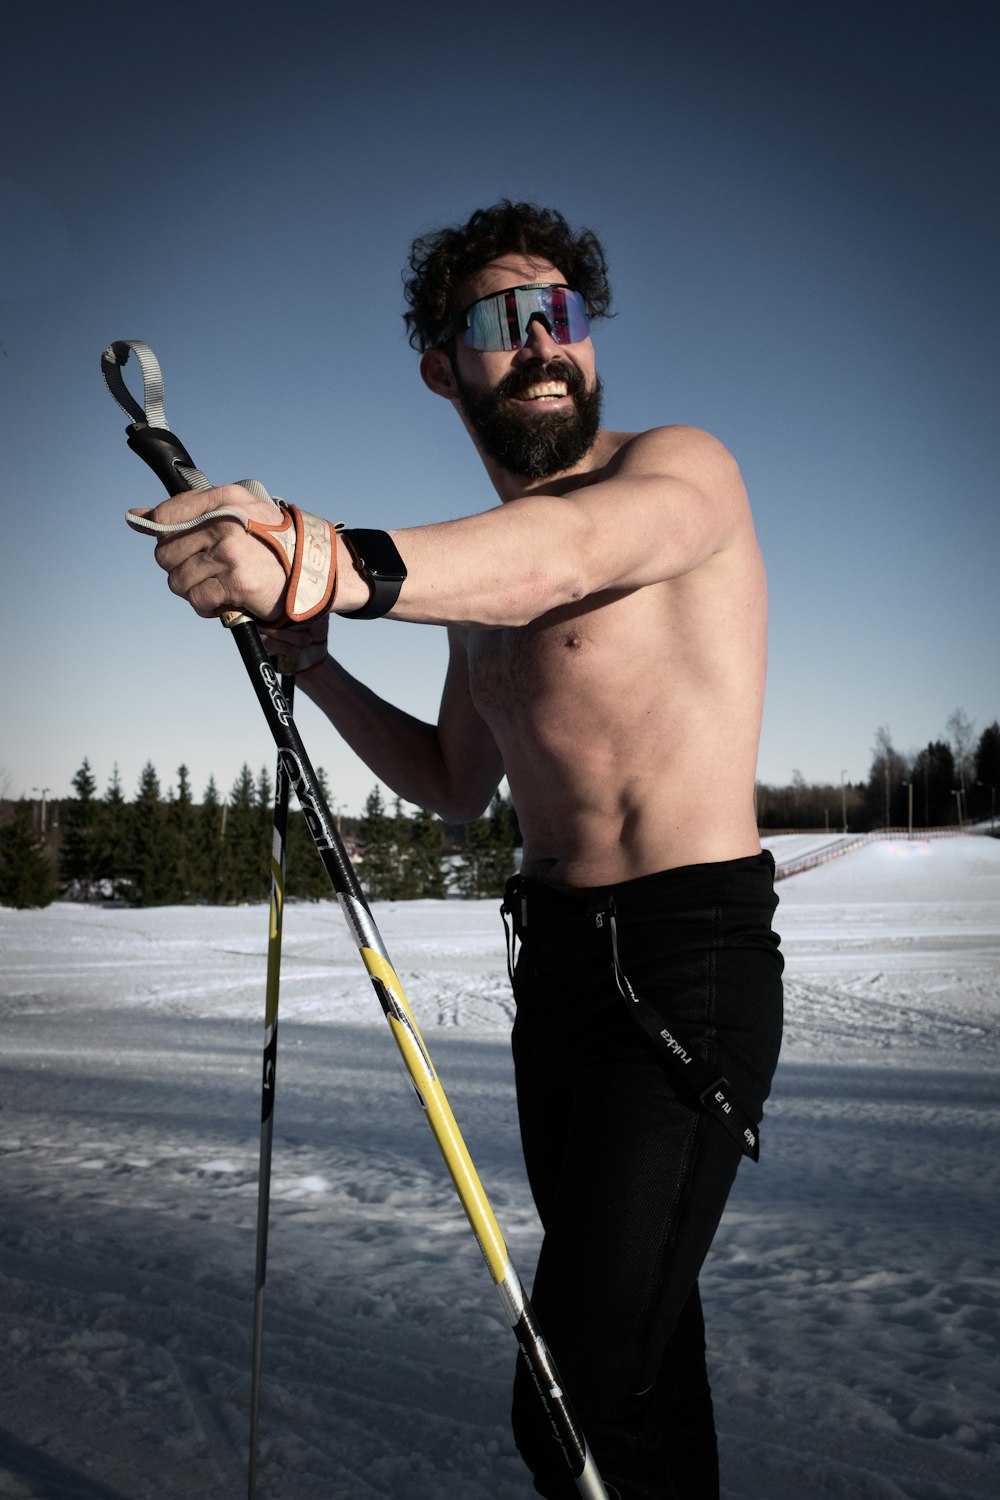 man in black shorts holding black and yellow ski pole